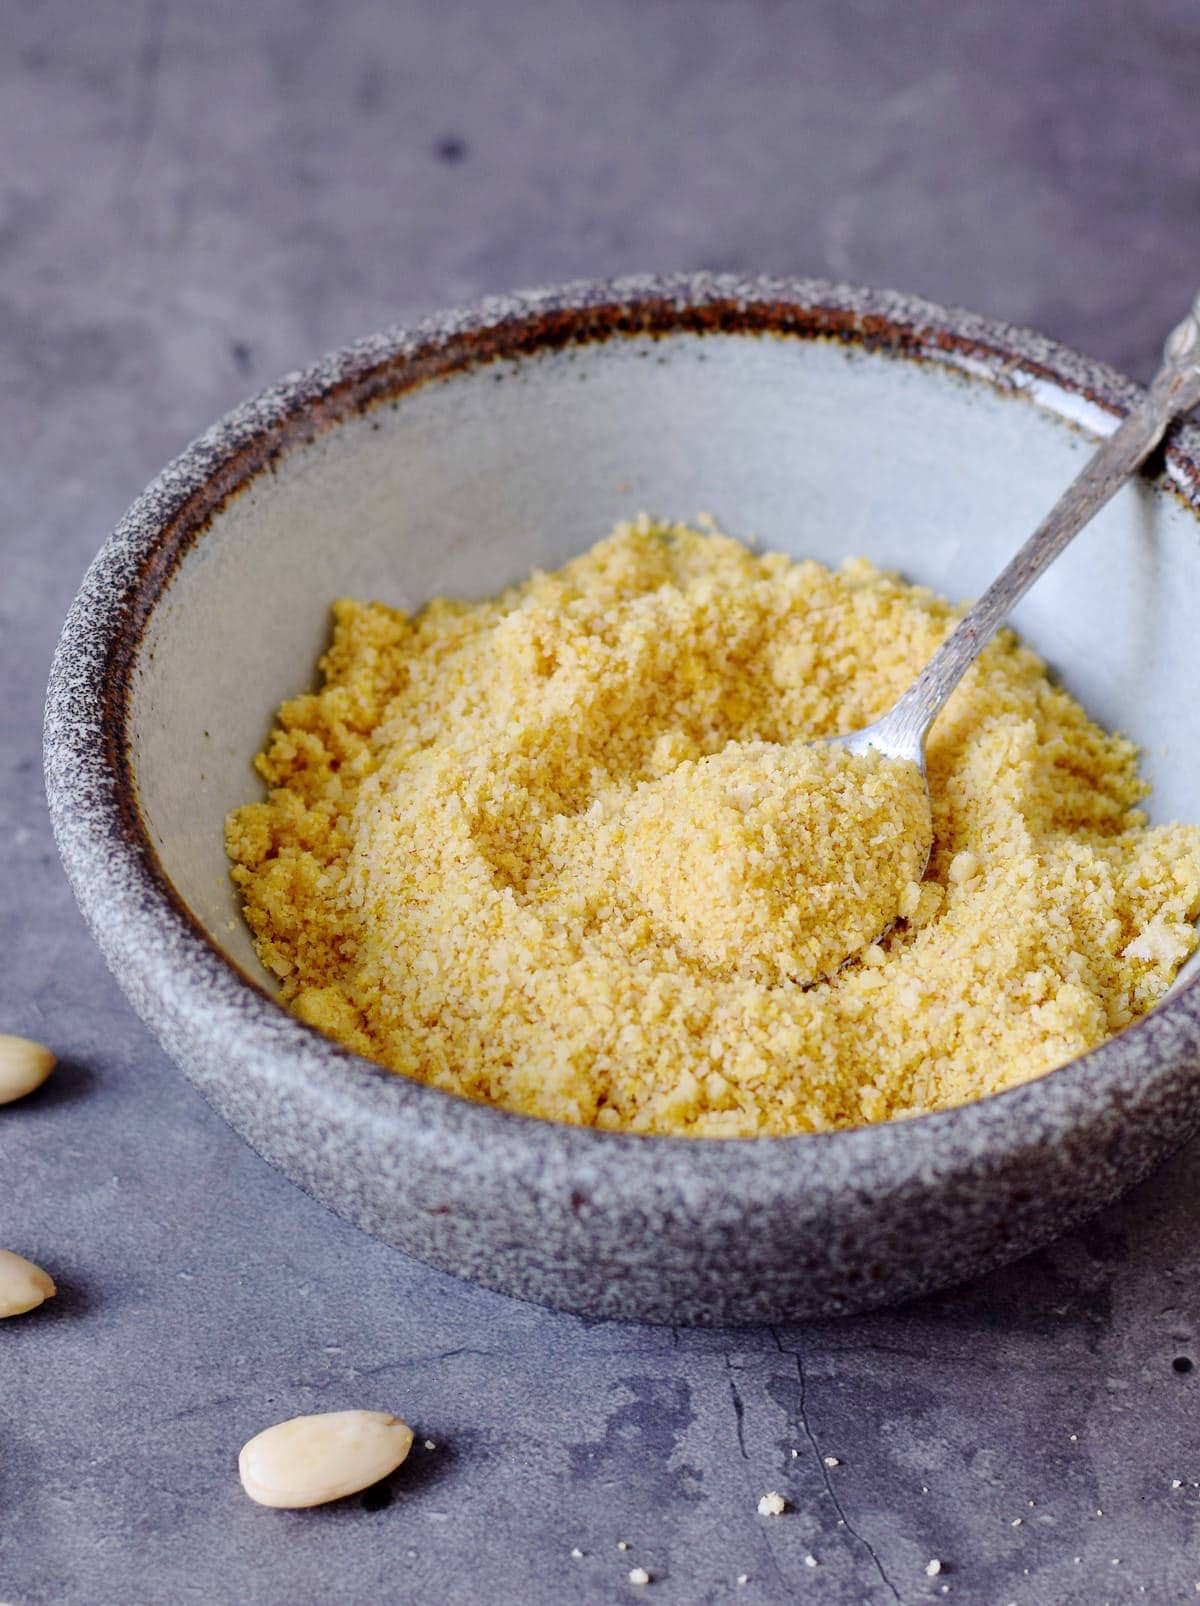 vegan parmesan cheese in a bowl with spoon